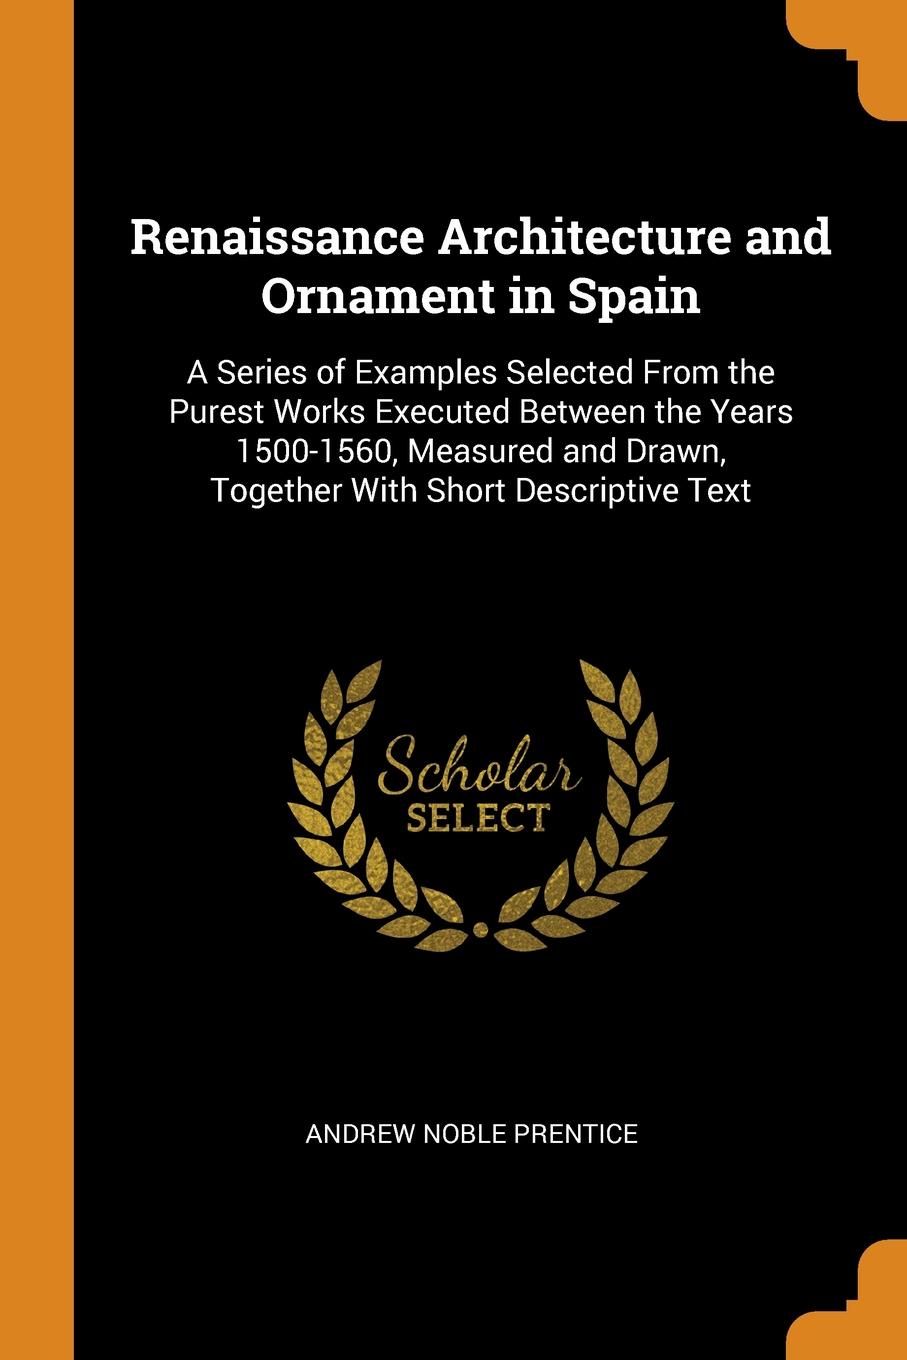 Renaissance Architecture and Ornament in Spain. A Series of Examples Selected From the Purest Works Executed Between the Years 1500-1560, Measured and Drawn, Together With Short Descriptive Text